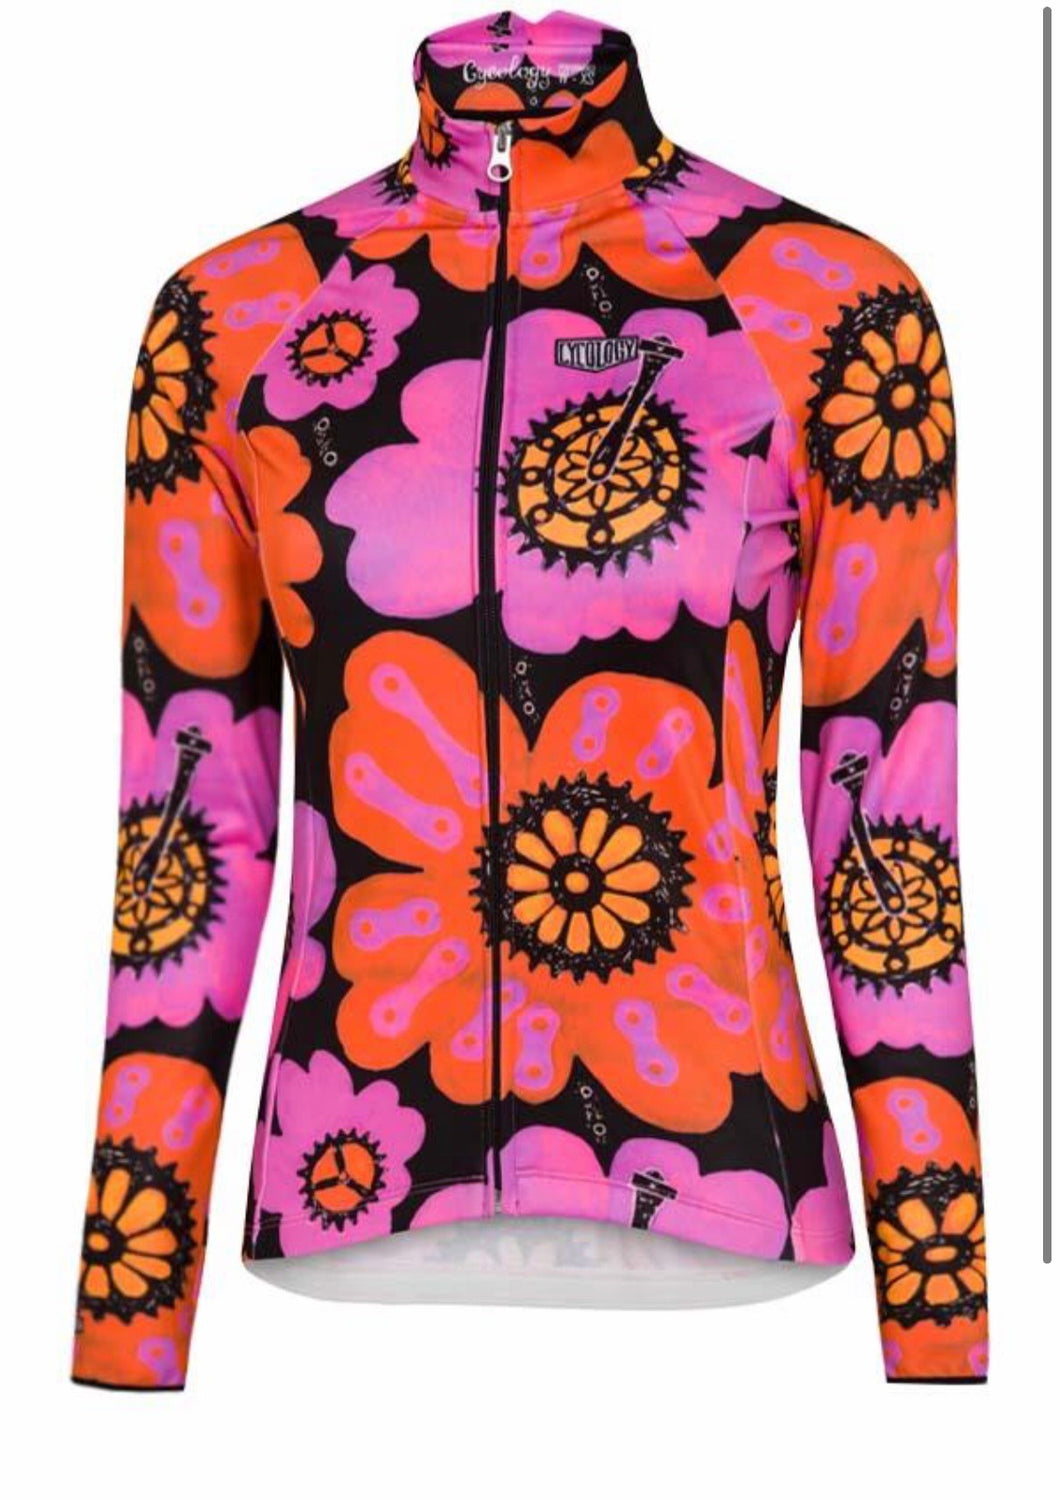 Cycology Quality Womens Cycling Windproof Jacket - Design Pedal Flower